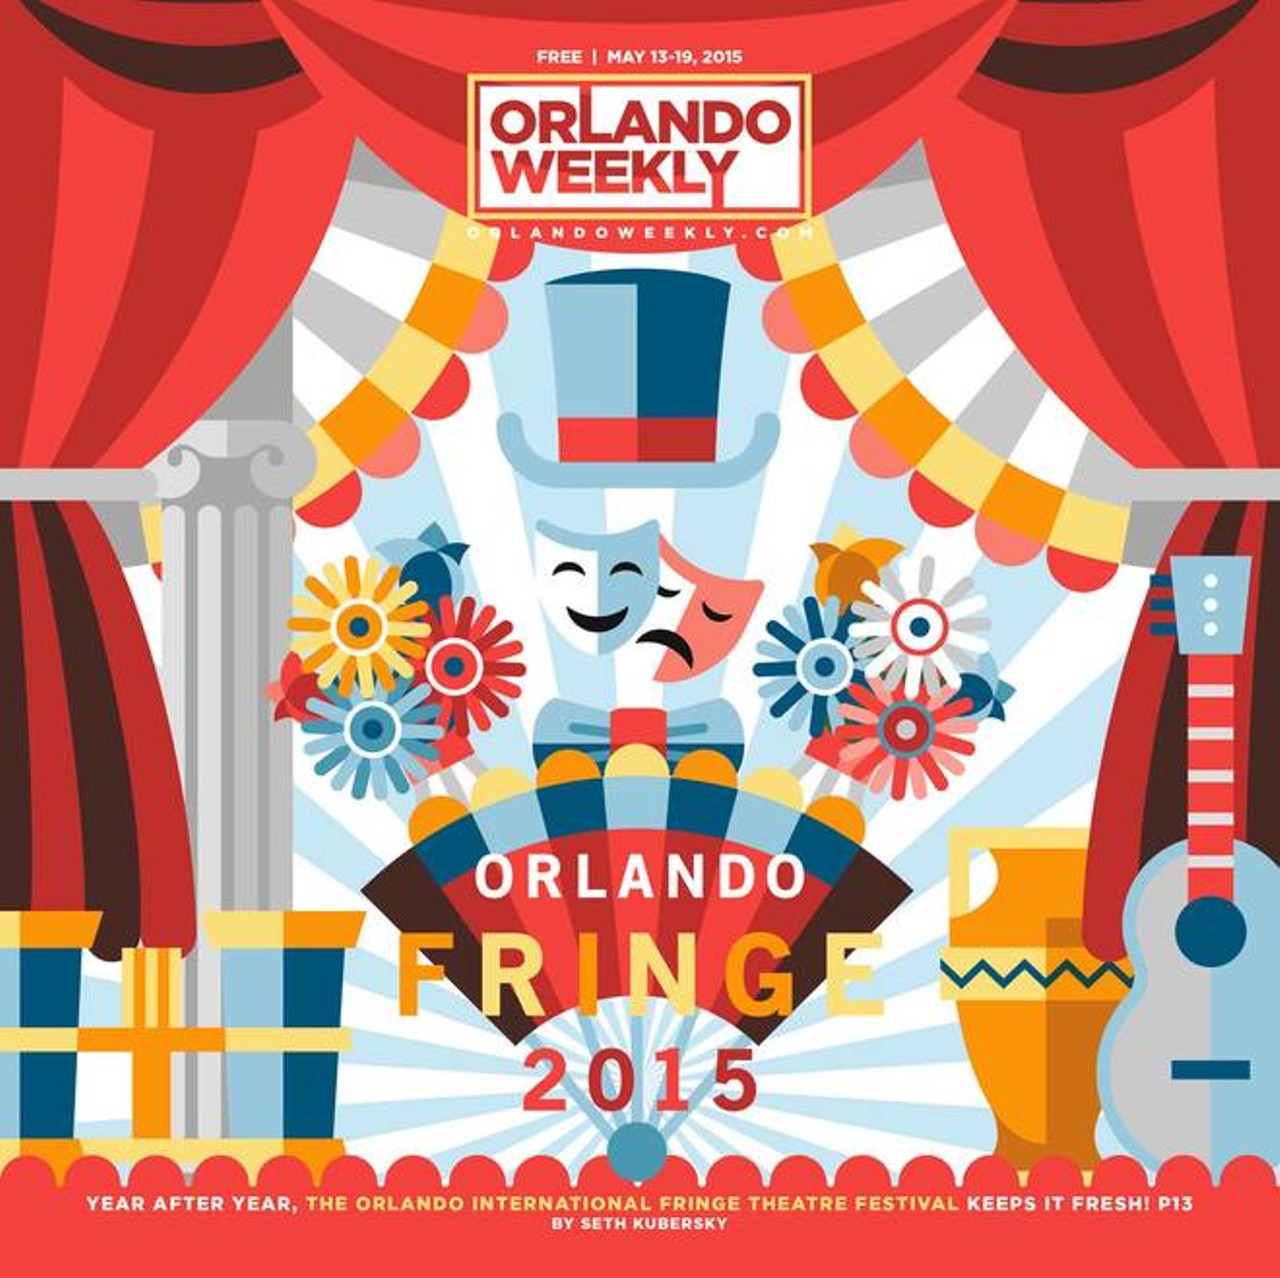 Orlando Fringe 2015
Fun fact: I used to actually work for Orlando Fringe for about two years. I designed their old logo, marketing collateral, and all that jazz. So it&#146;s been a fun challenge every year to brand Orlando Weekly&#146;s Orlando Fringe issue without directly ripping off my own designs from years past &#151; who else gets to say that? Life is weird. At the end of the day, this one was just a fun piece of art that captures both the playful spirit of the fest, but injects something different into the mix.